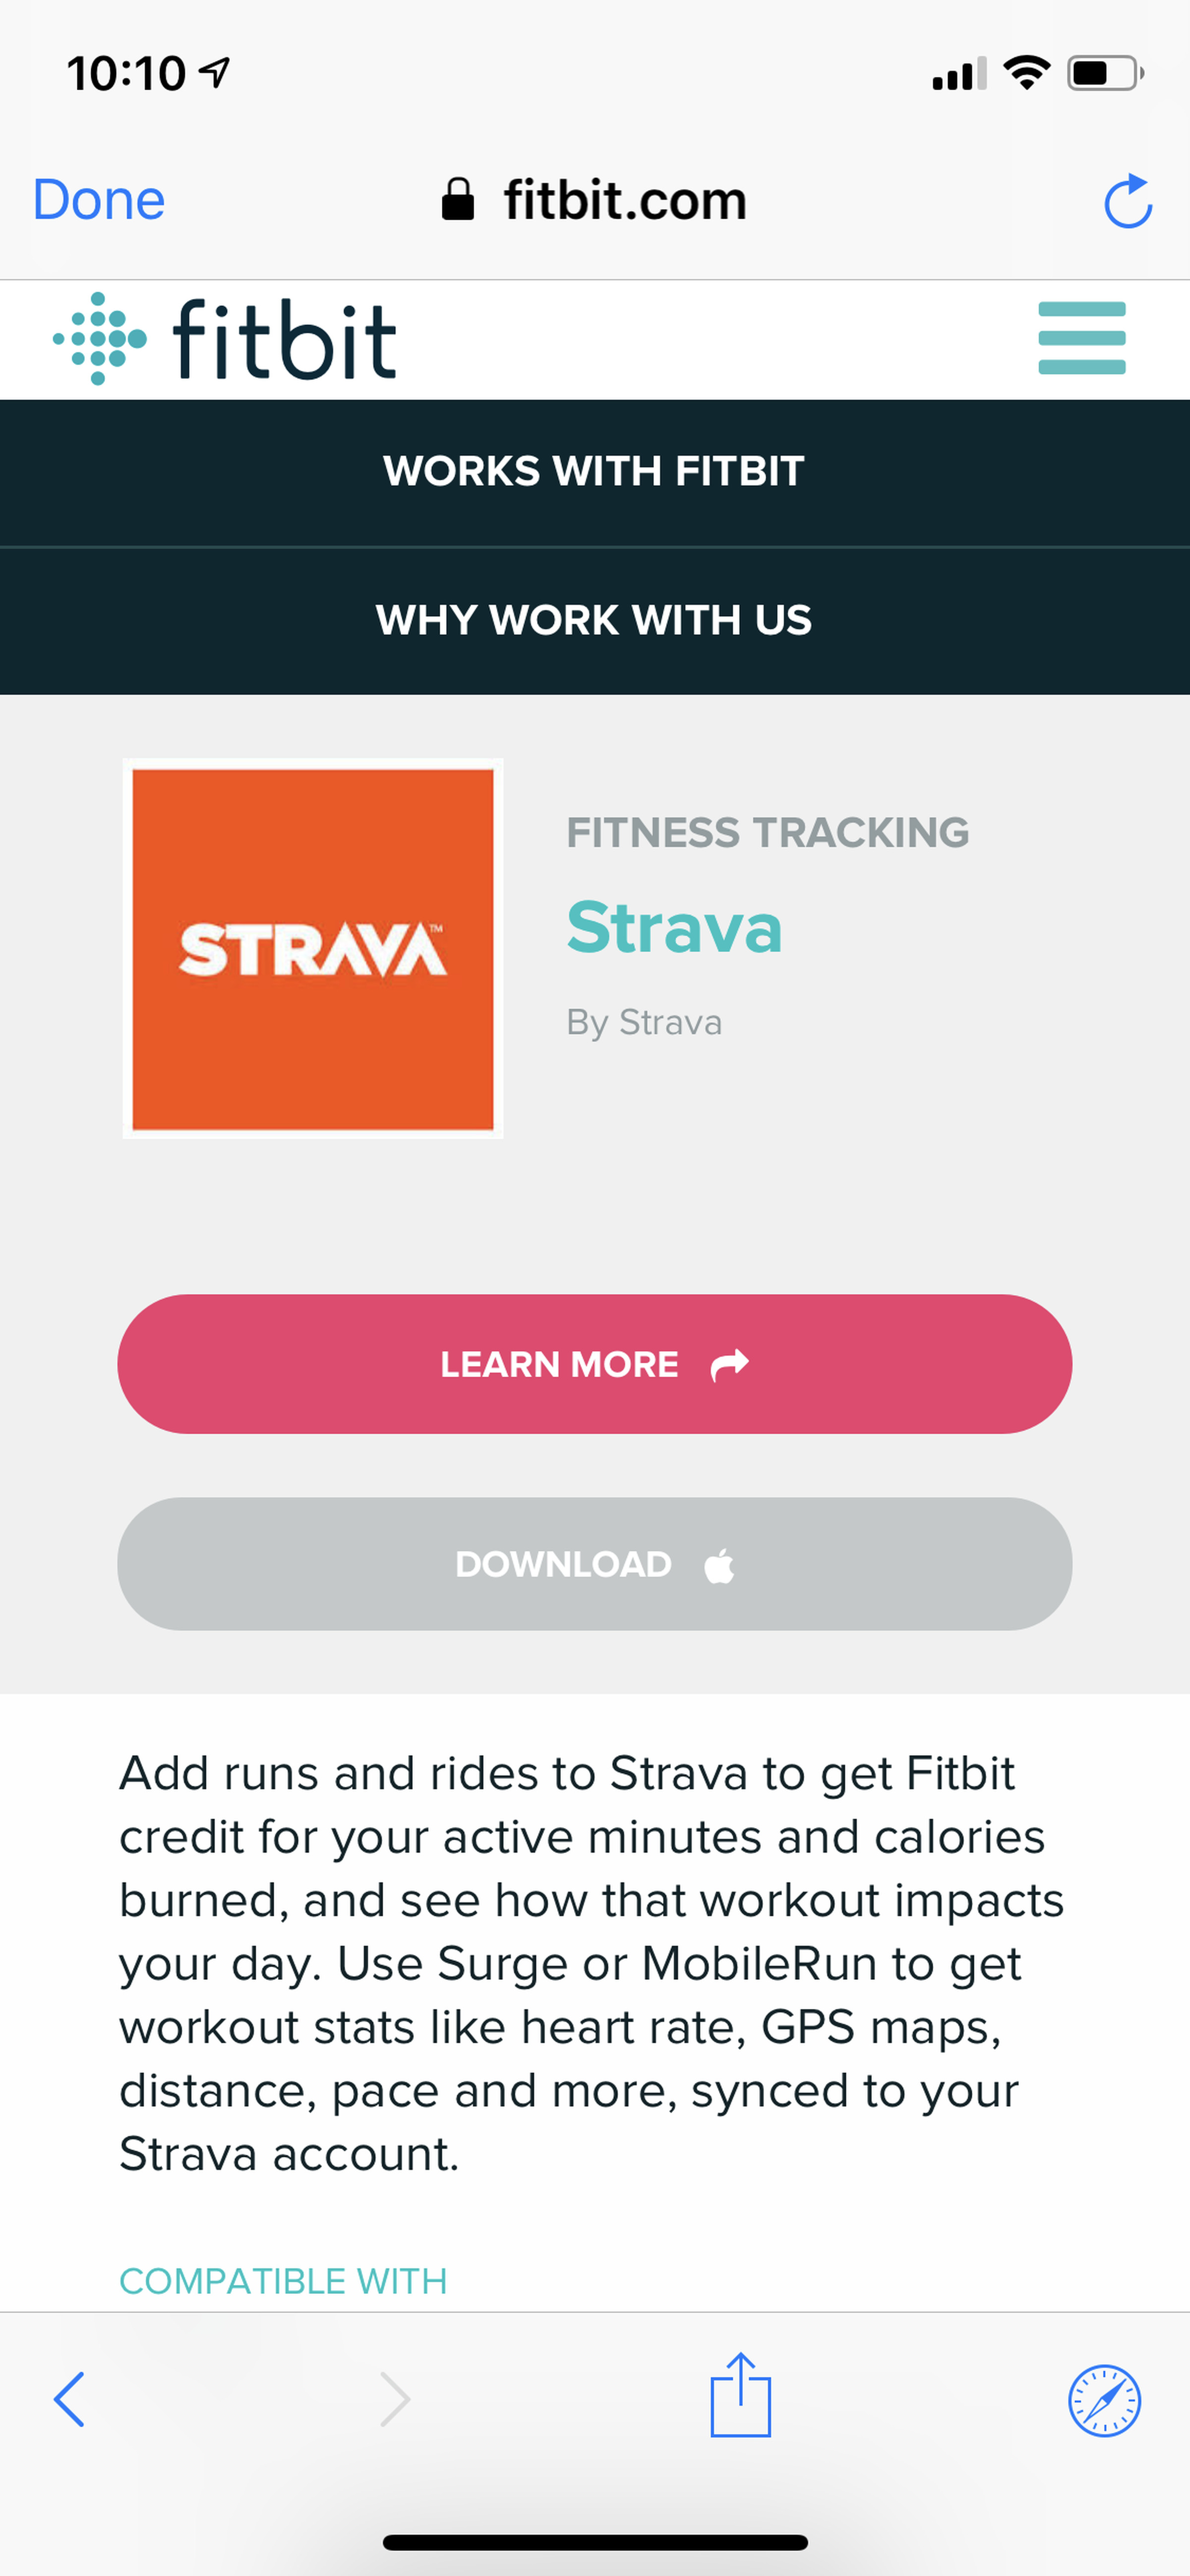 Fitbit and Strava